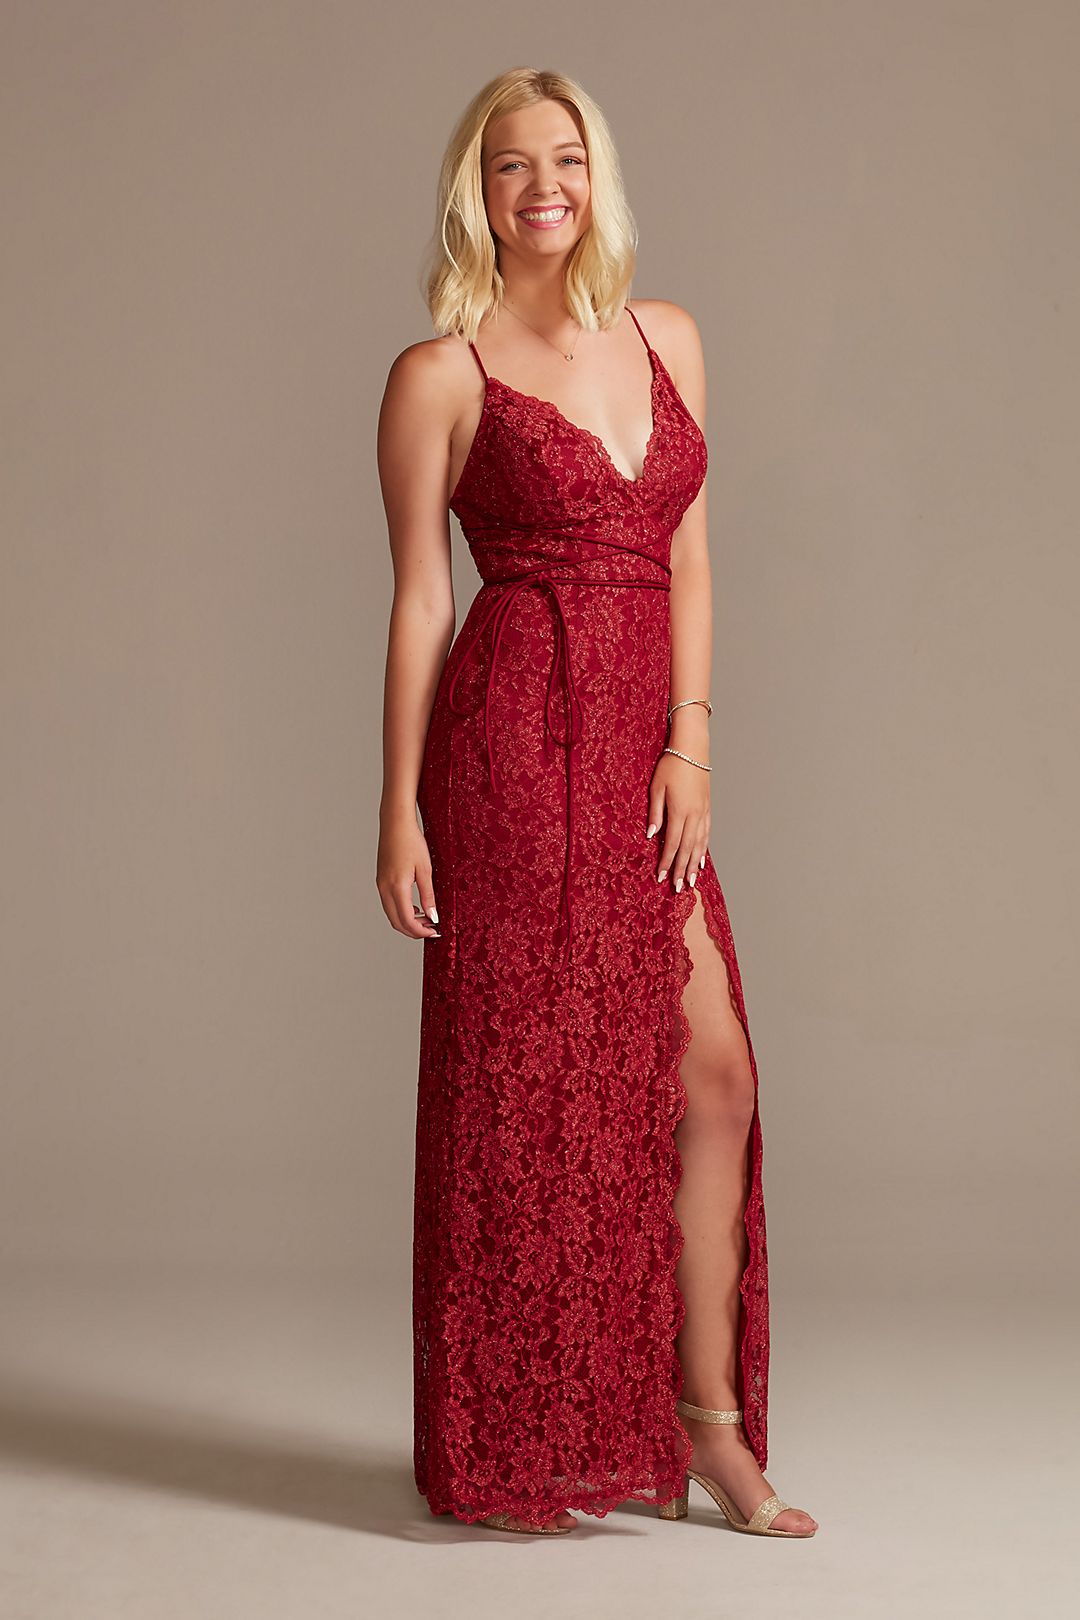 Allover Lace Sheath Gown with Plunging Neckline Image 1